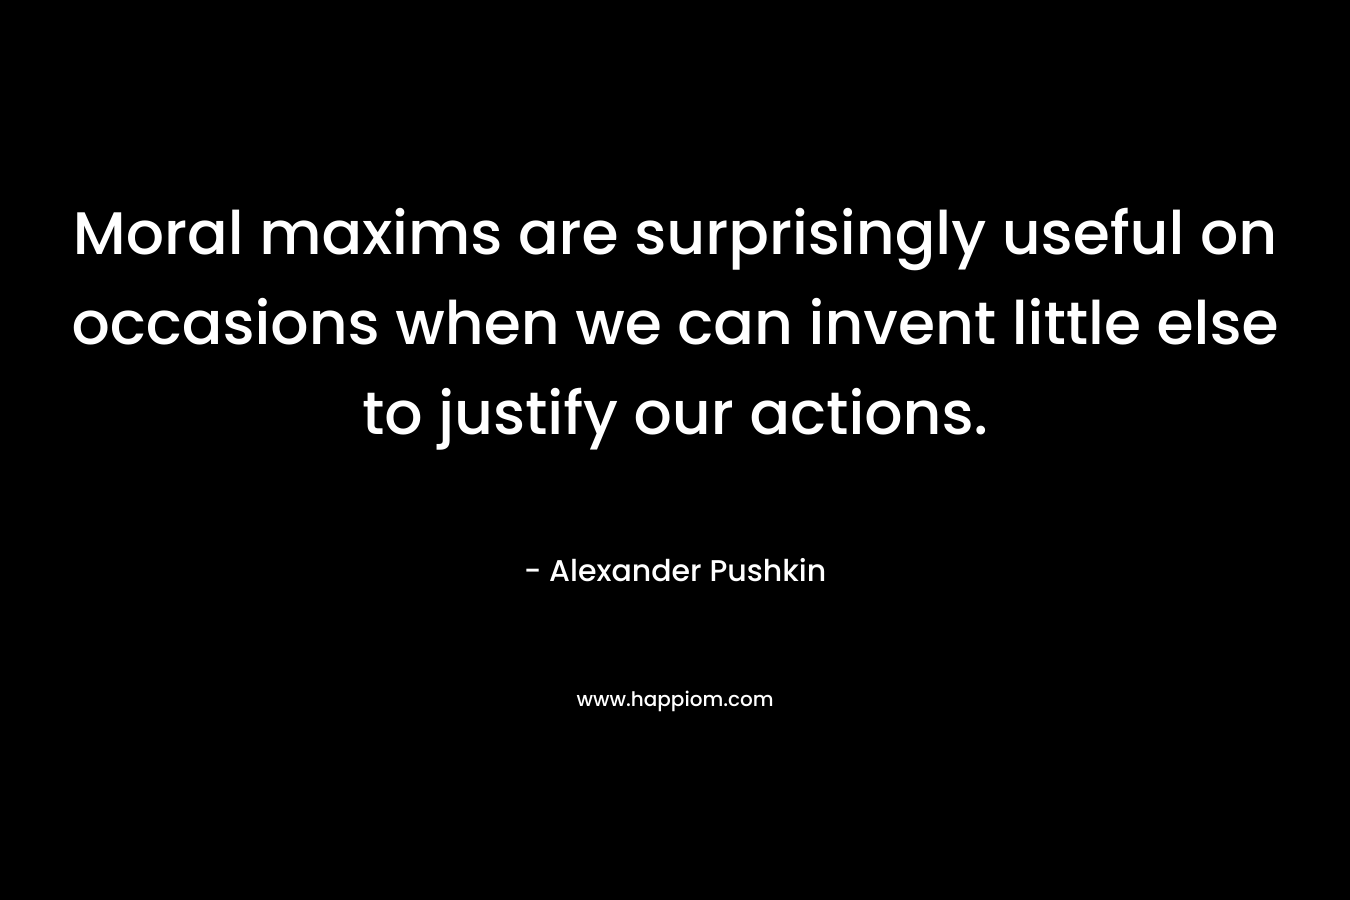 Moral maxims are surprisingly useful on occasions when we can invent little else to justify our actions.